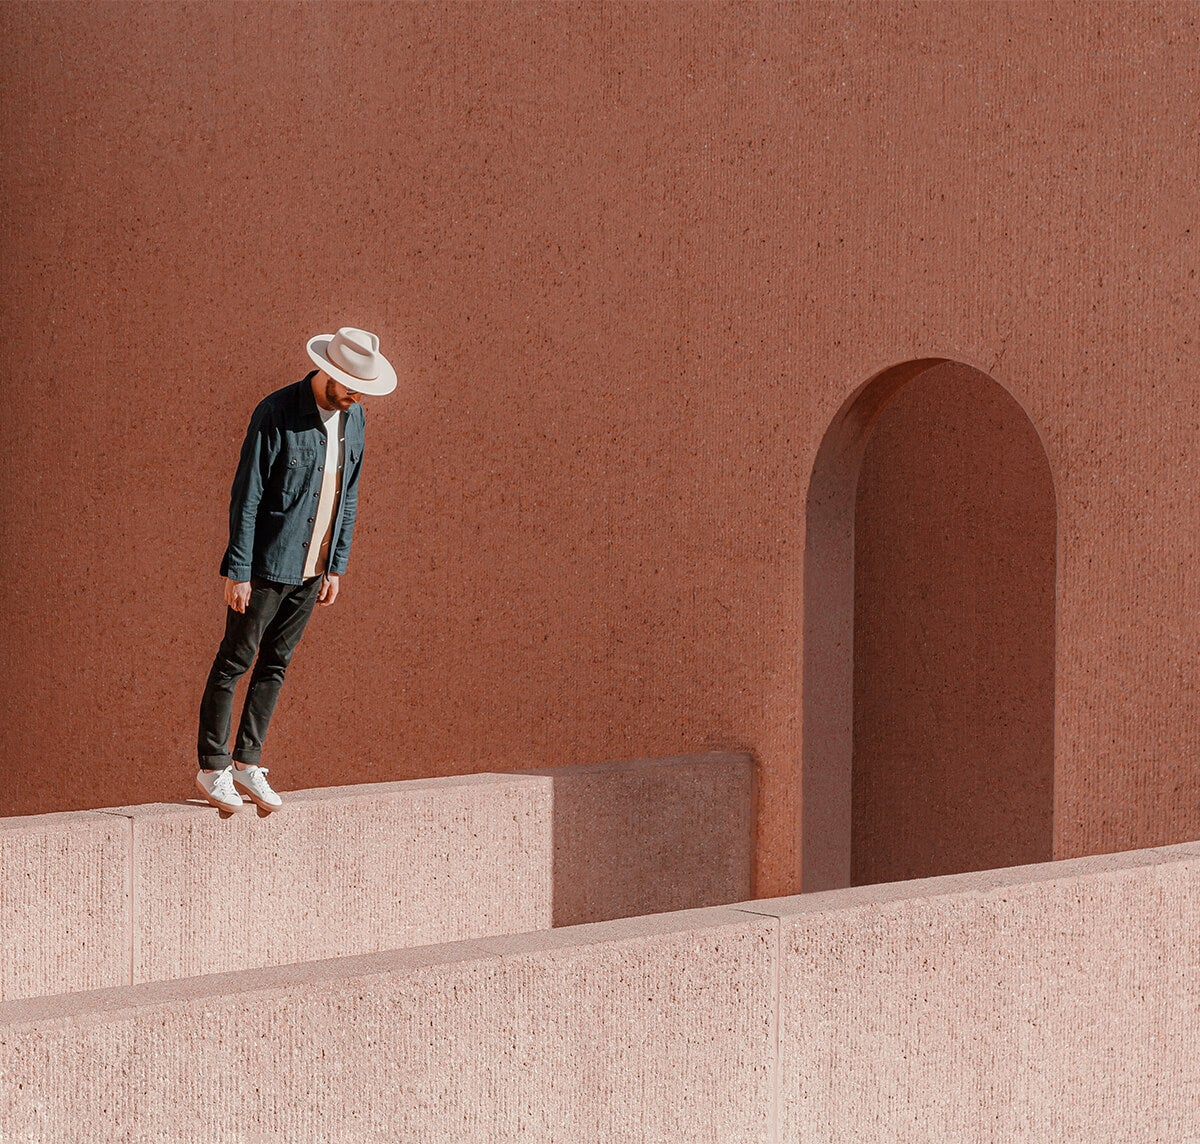 Optical illusion of man standing on ledge and leaning over